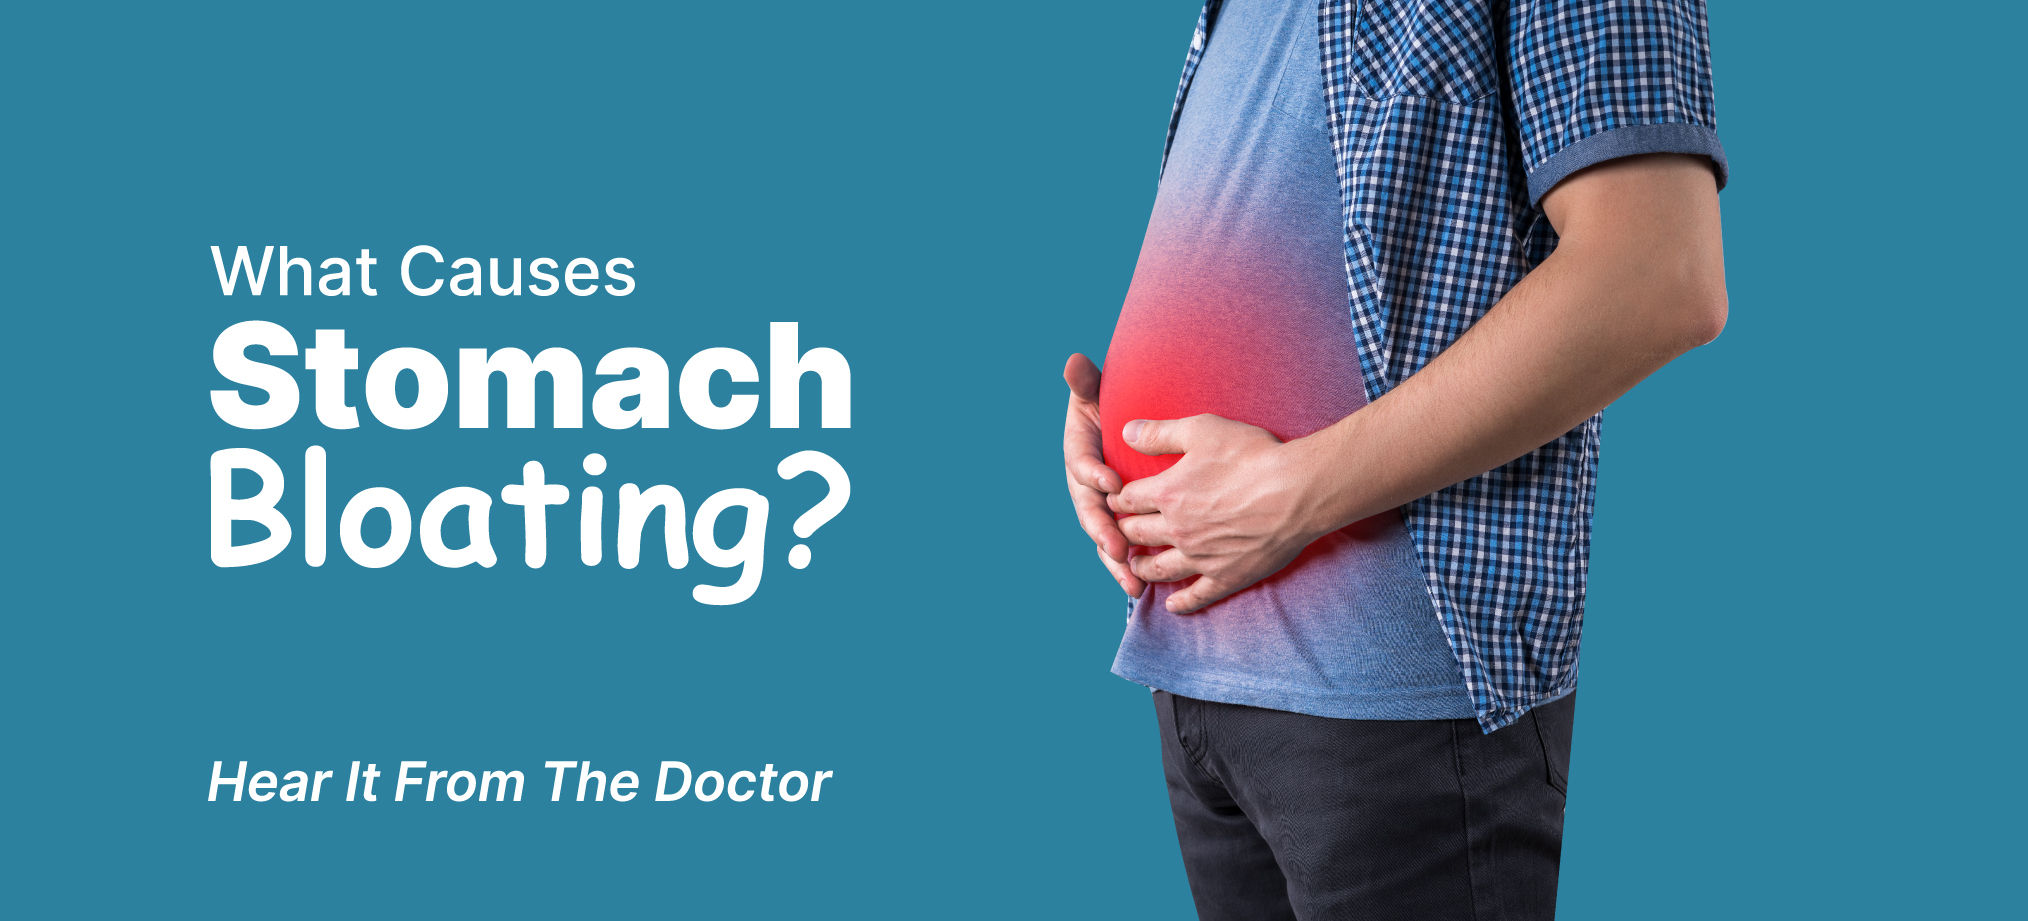 Easy Ways To Manage Stomach Bloating